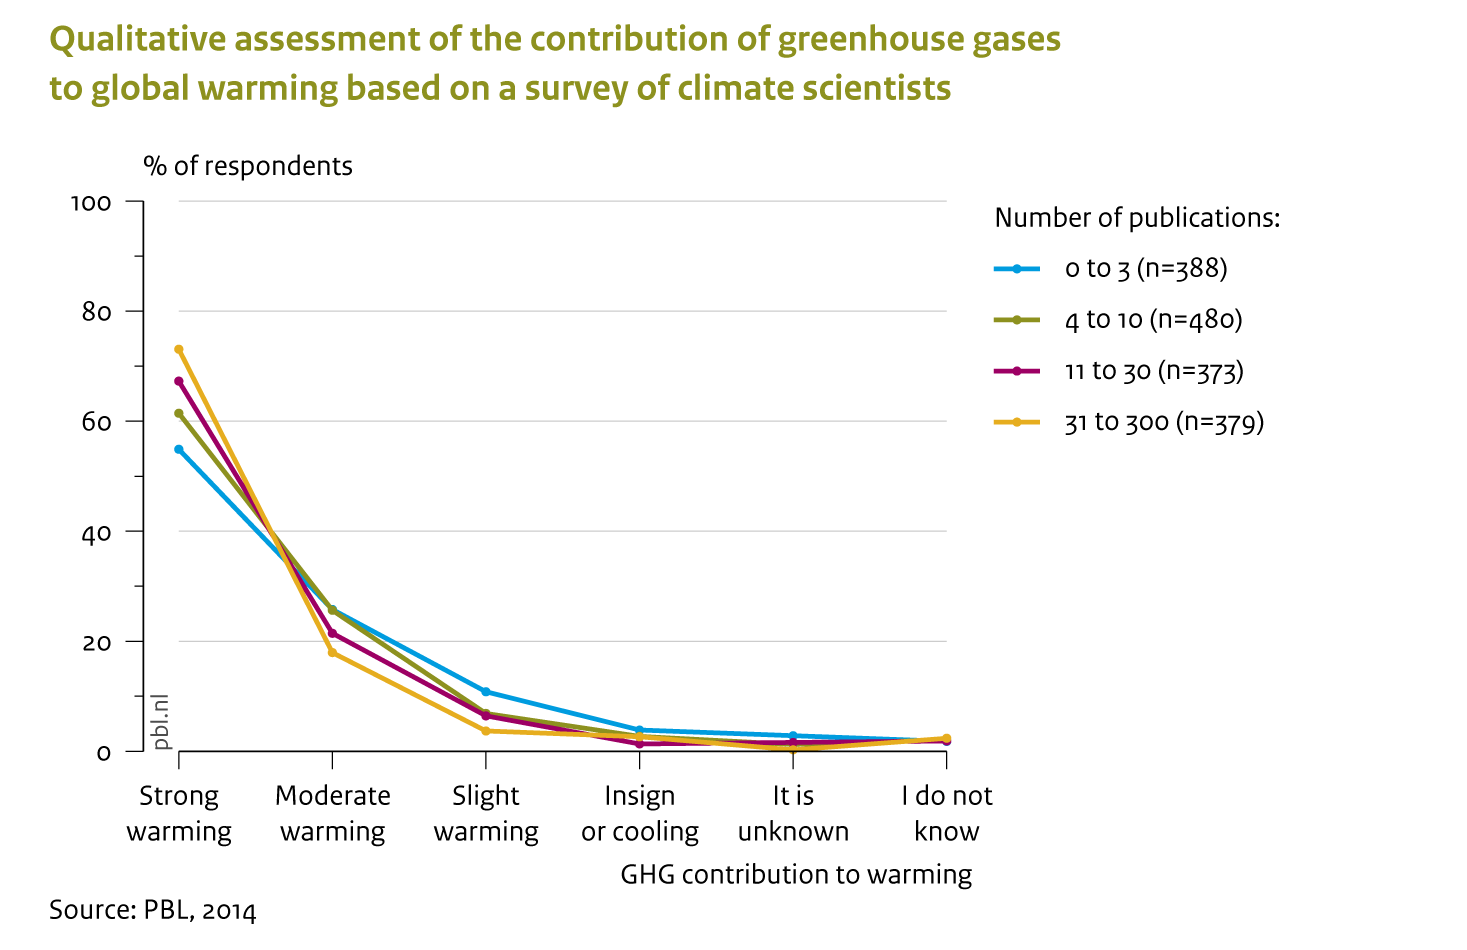 The more publications the respondents report to have written, the more important they consider the contribution of greenhouse gases to global warming. Responses are shown as a percentage of the number of respondents (n) in each subgroup, segregated according to self-declared number of peer-reviewed publications.